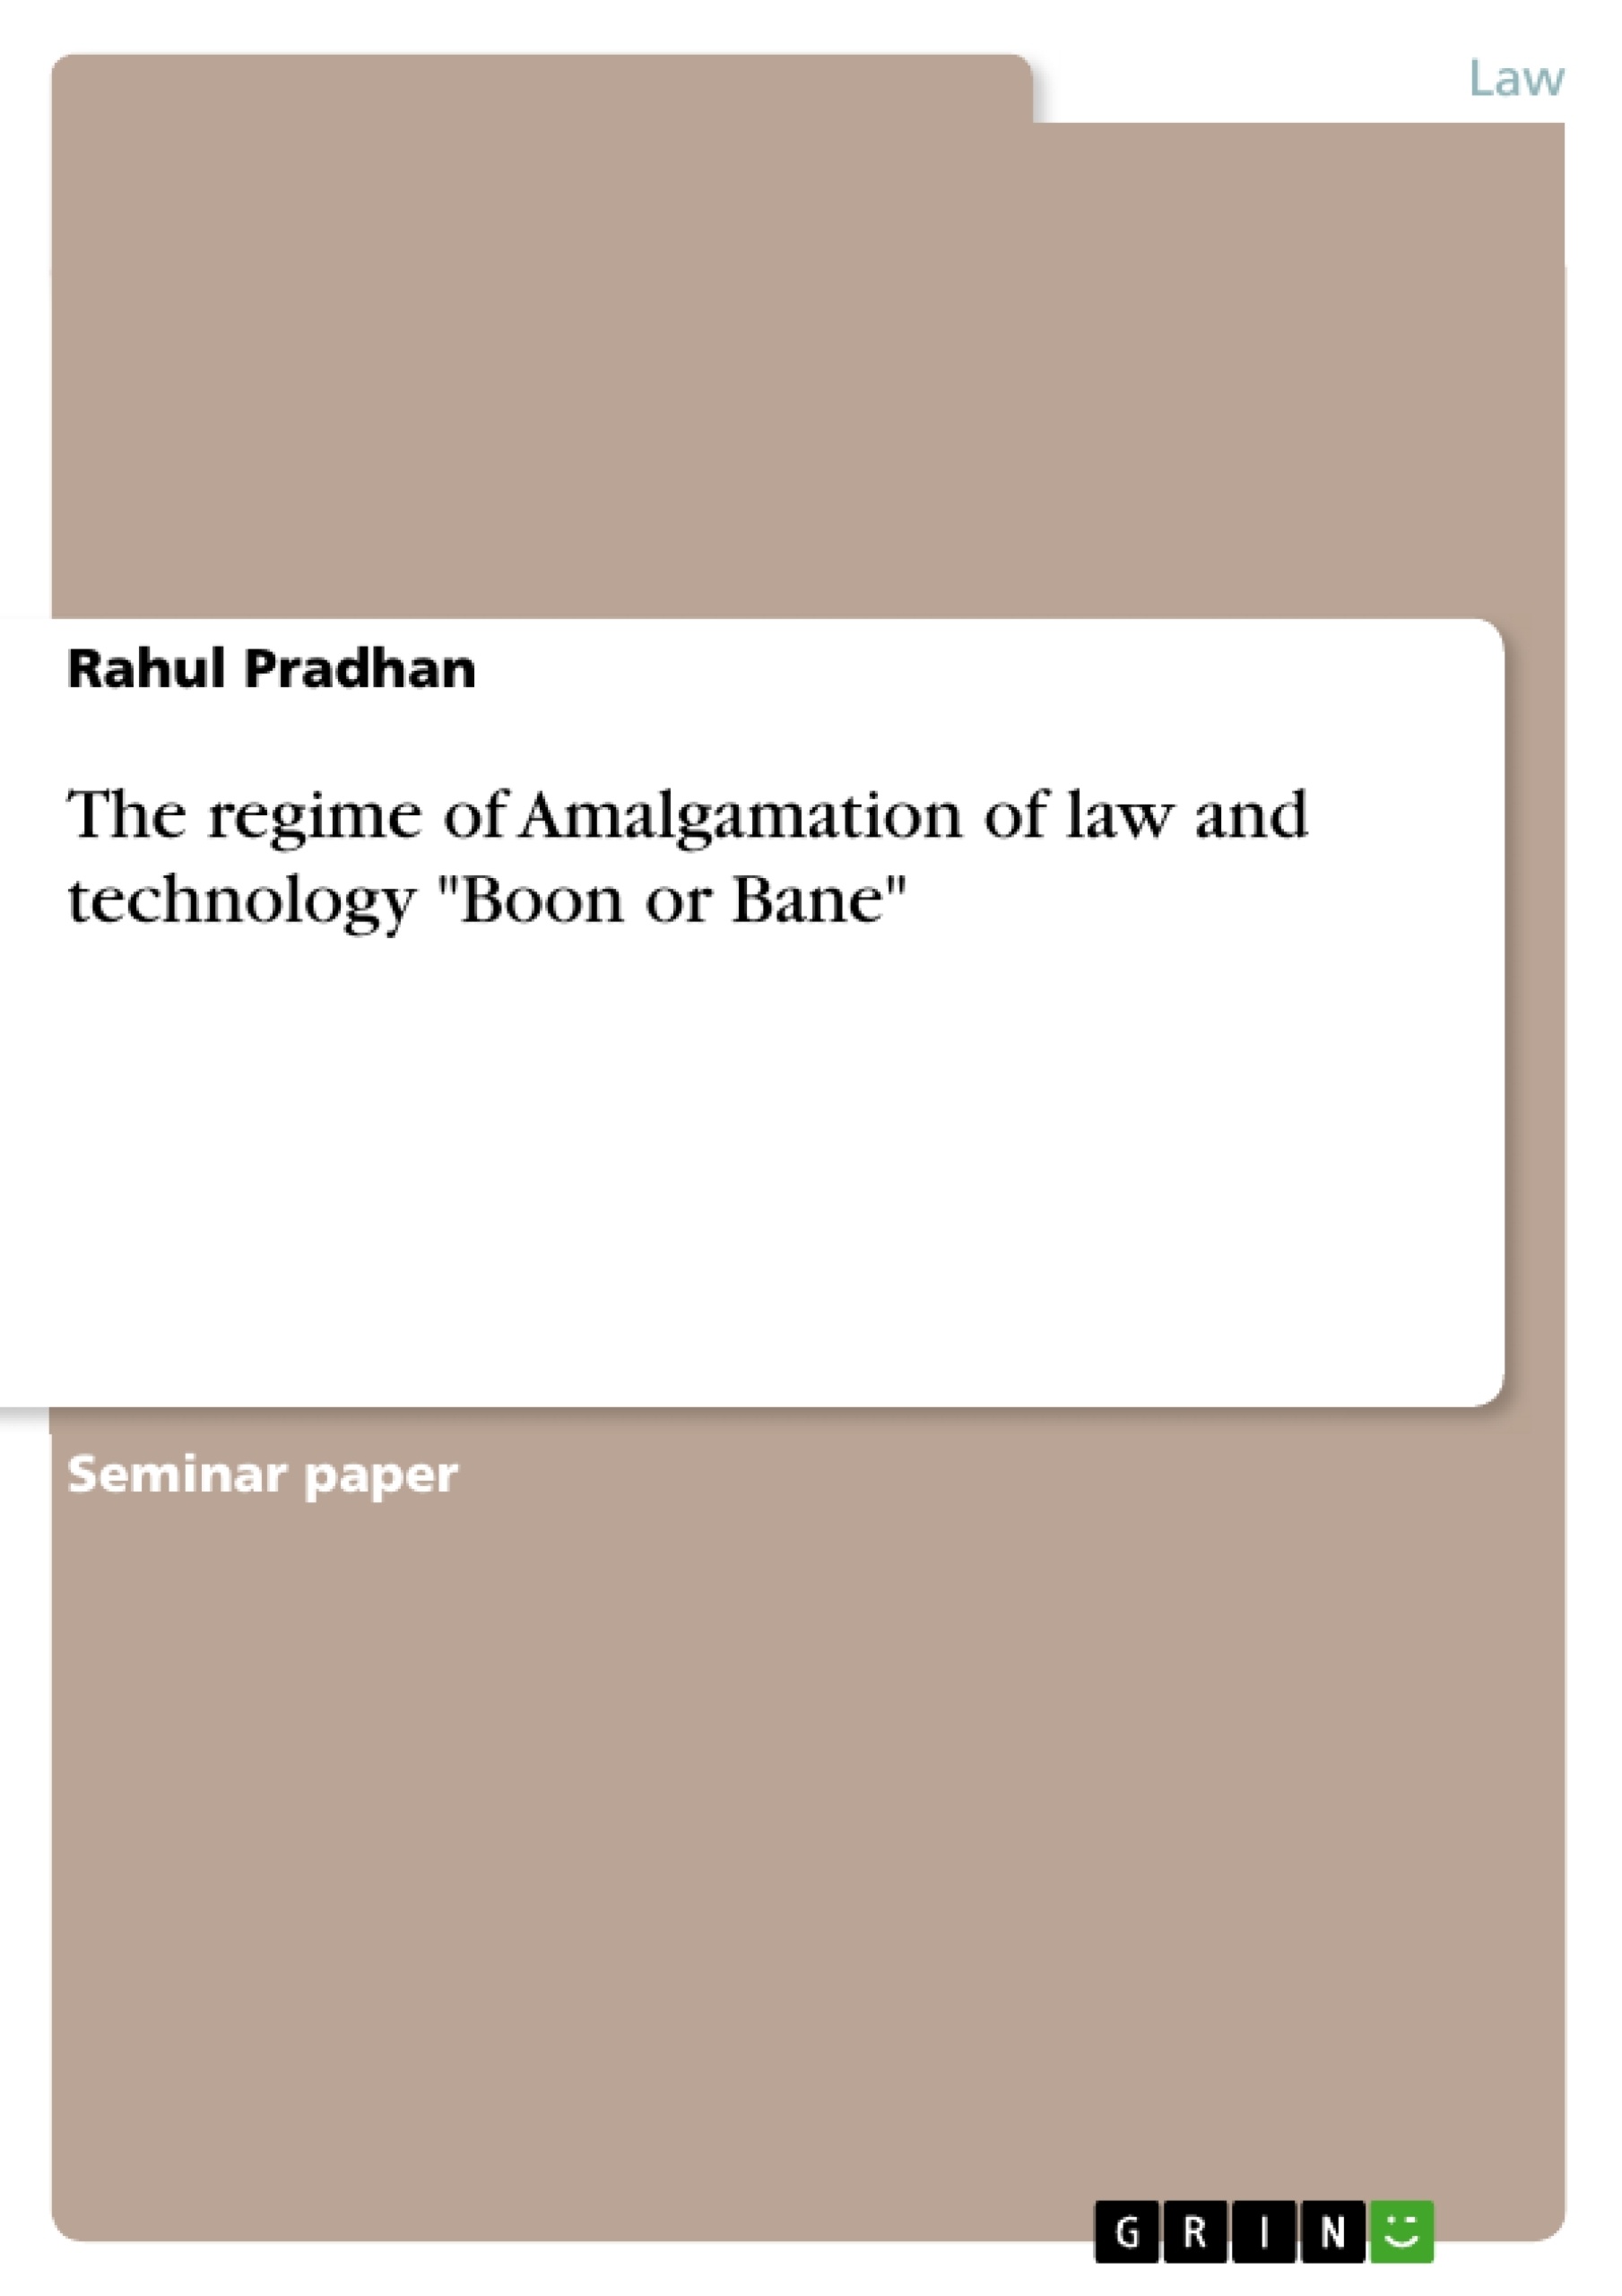 Título: The regime of Amalgamation of law and technology "Boon or Bane"